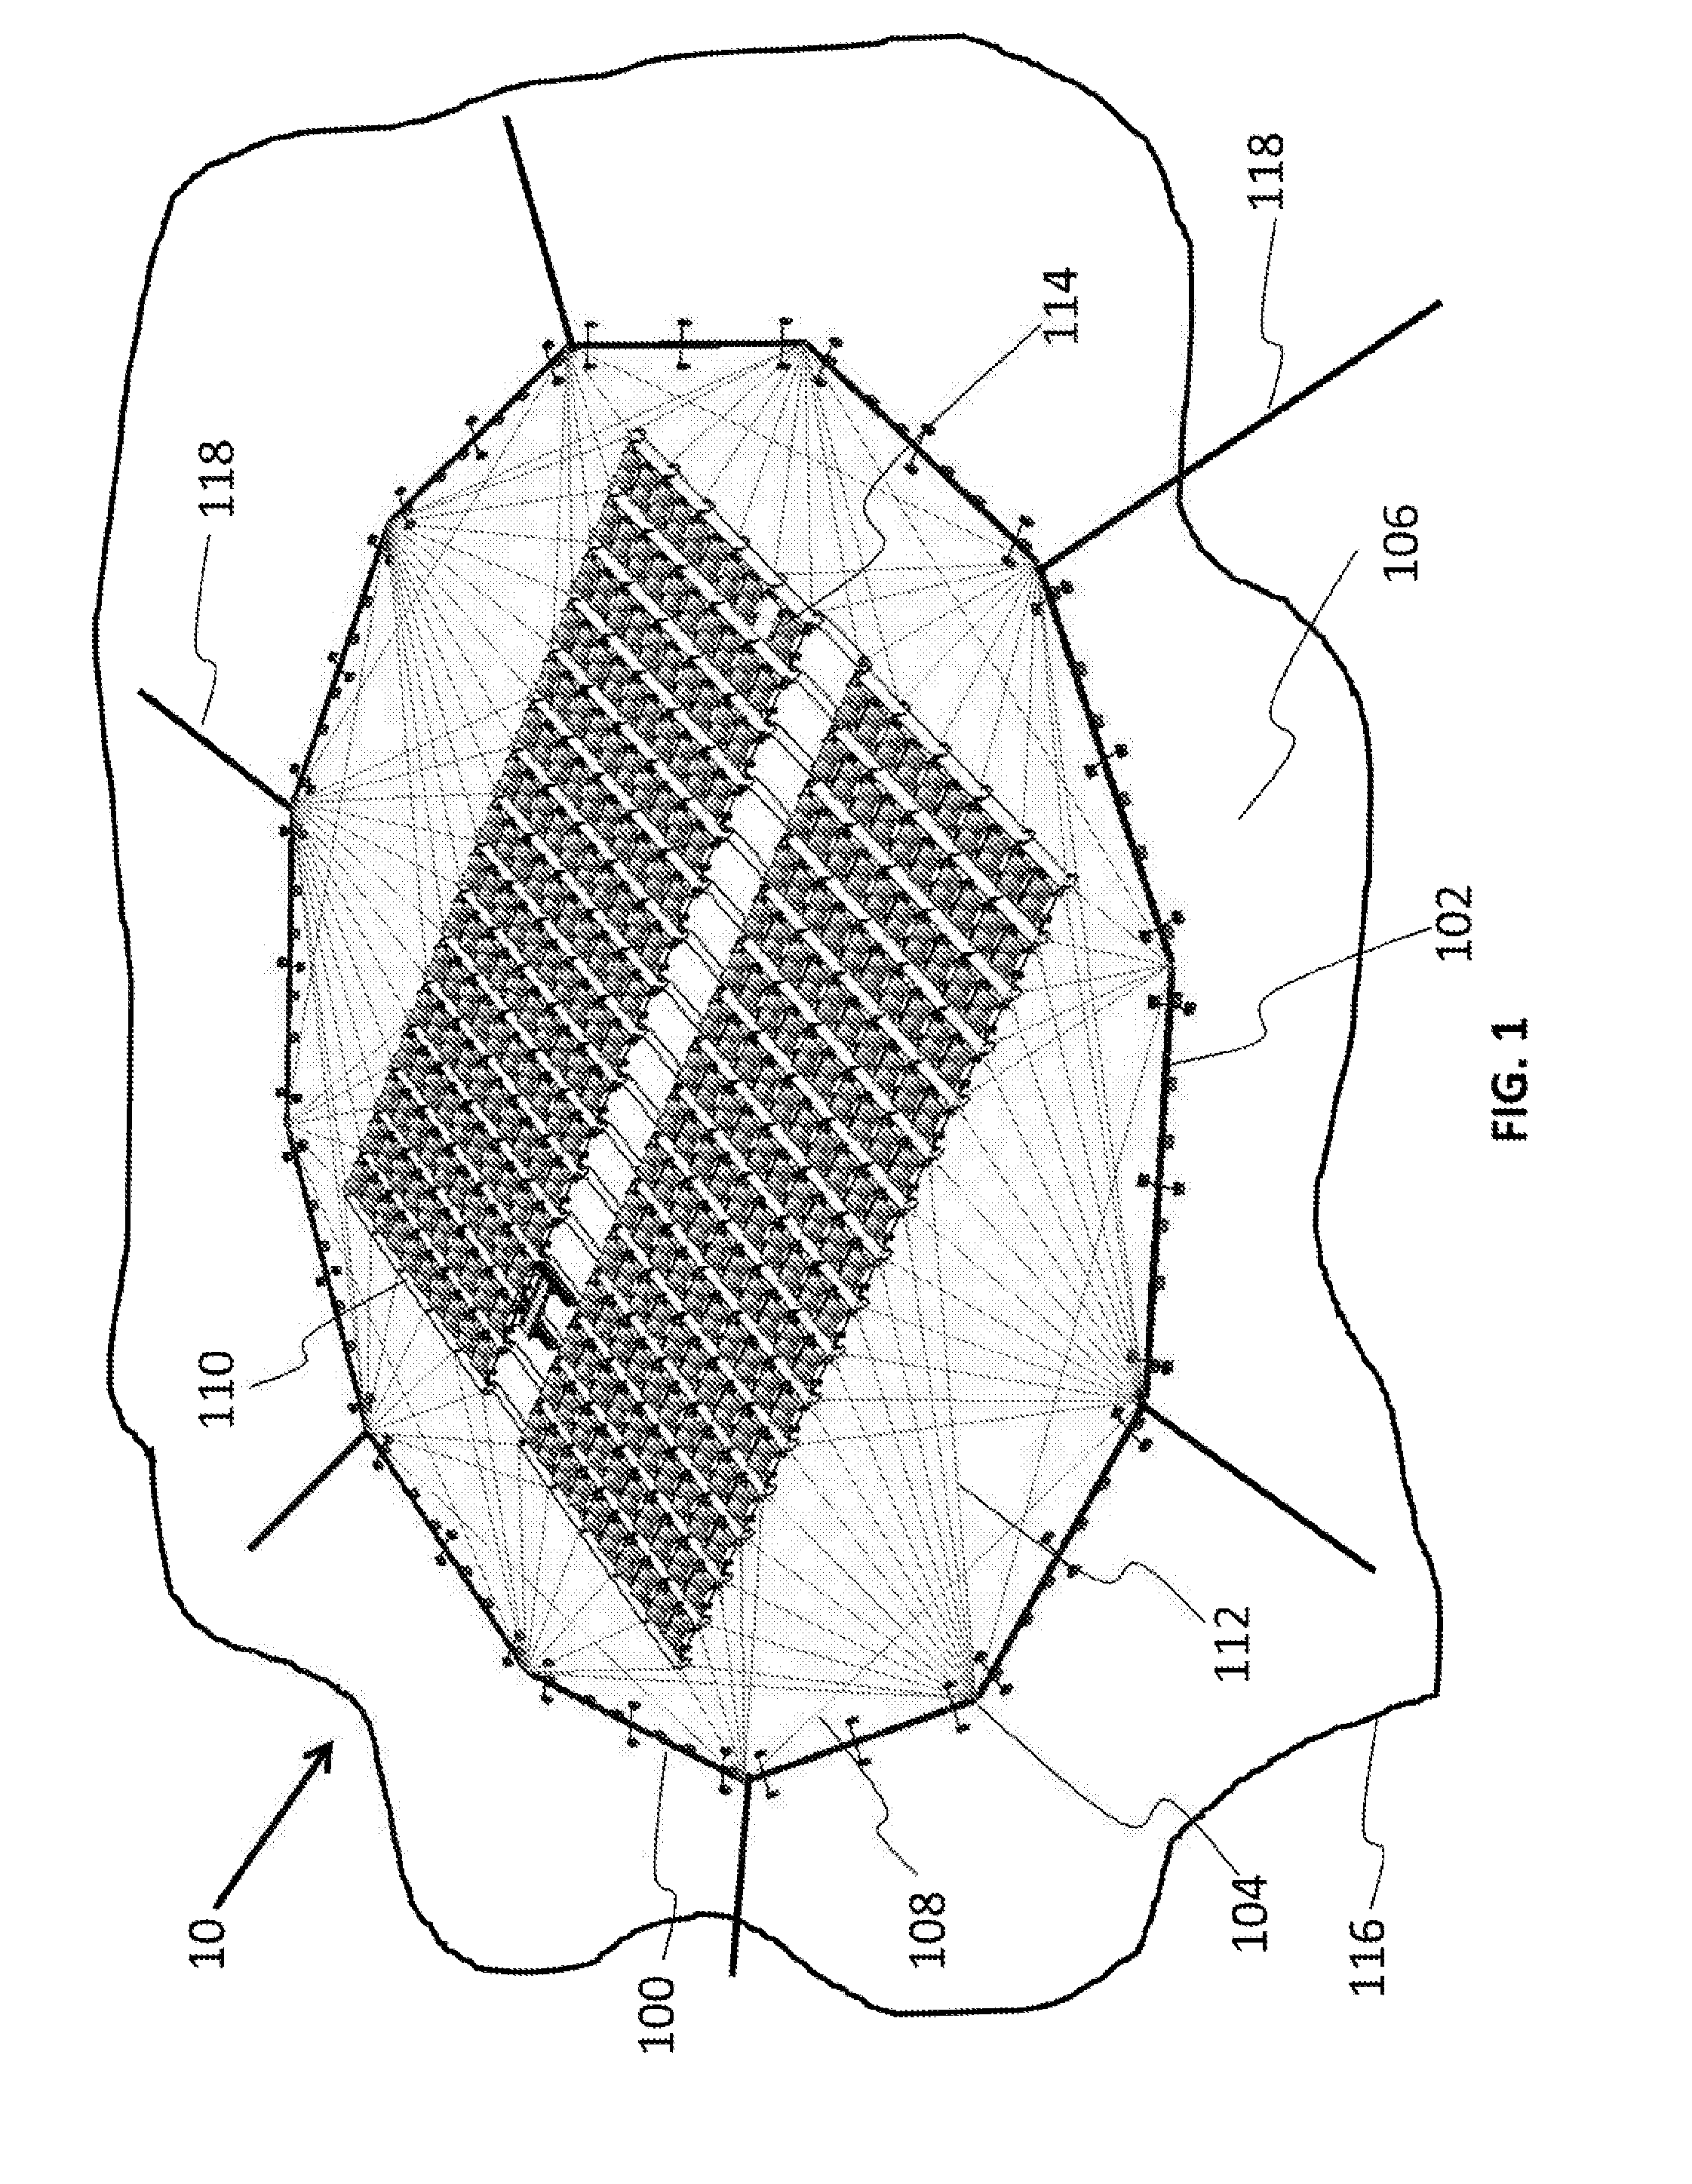 Corded lattice based floating photovoltaic solar field with independently floating solar modules